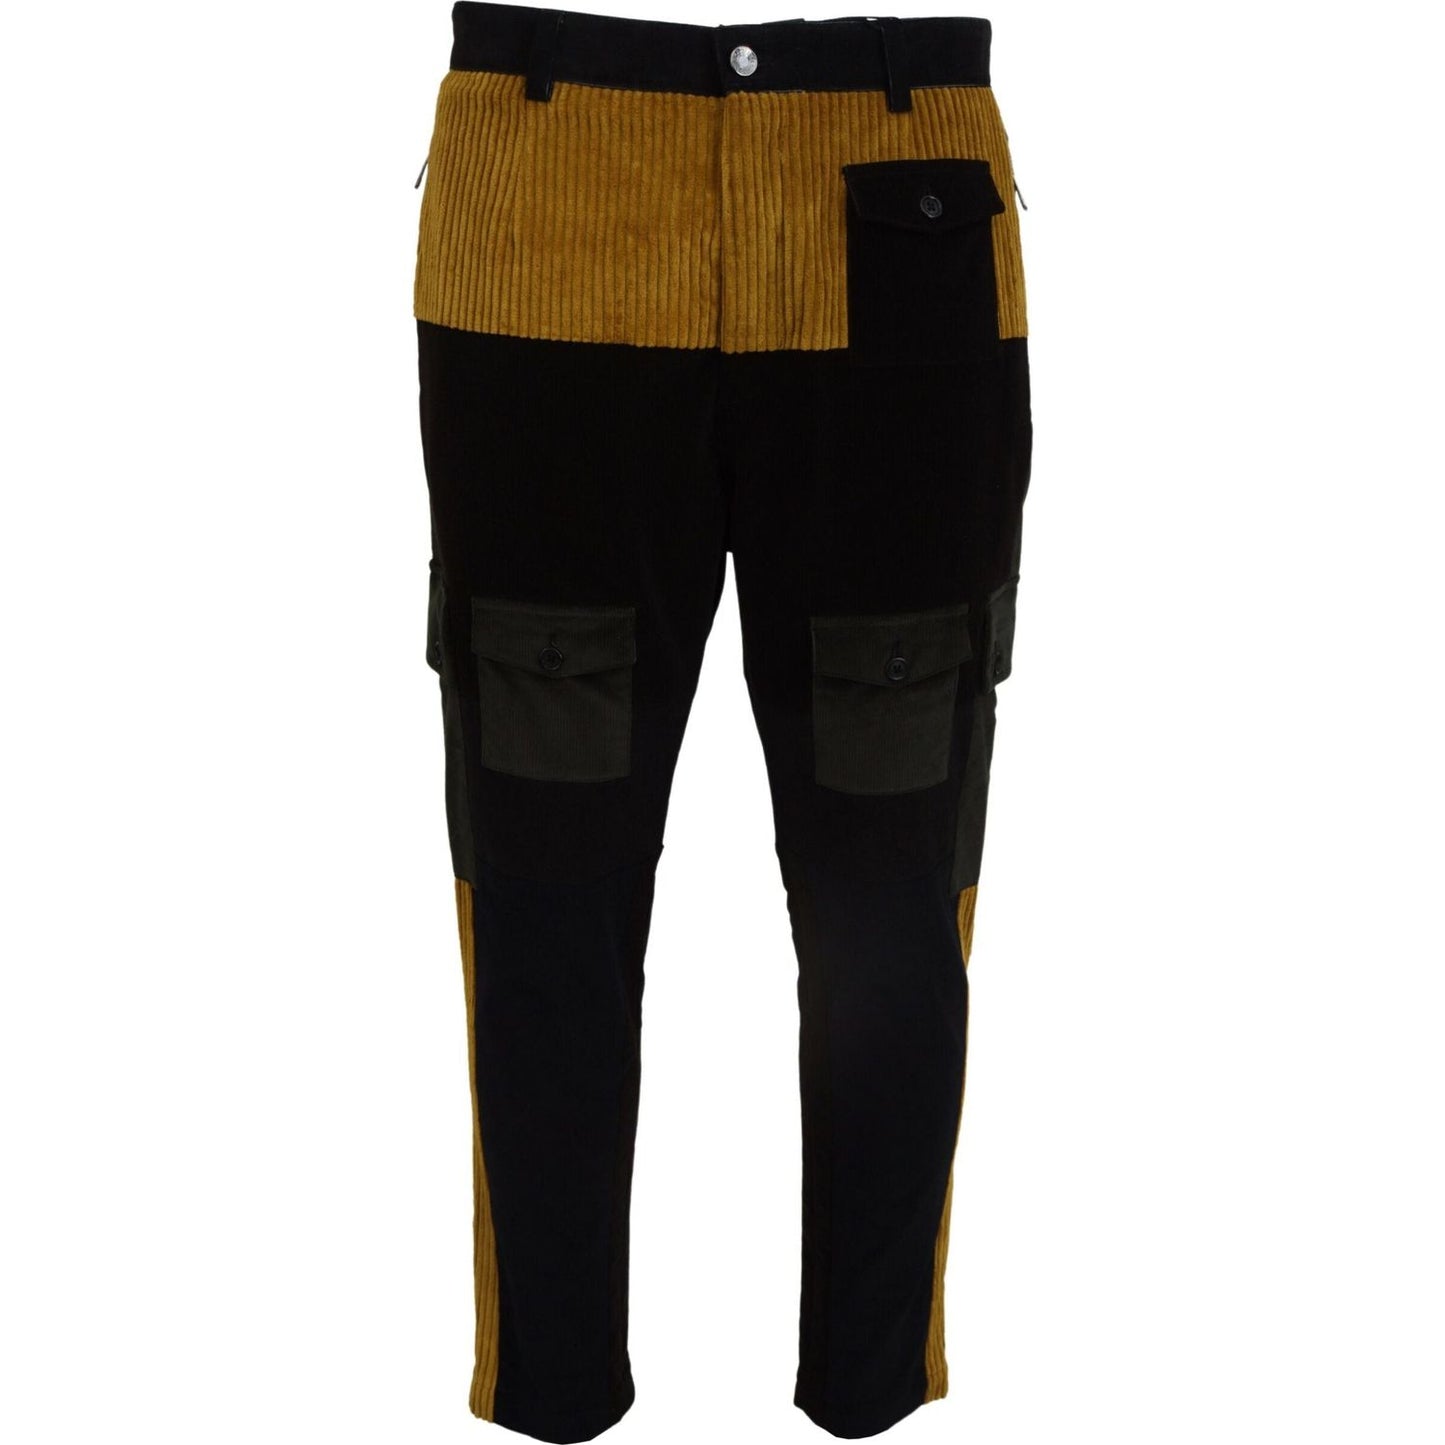 Dolce & GabbanaElegant Black Tapered Trousers with Yellow AccentMcRichard Designer Brands£629.00